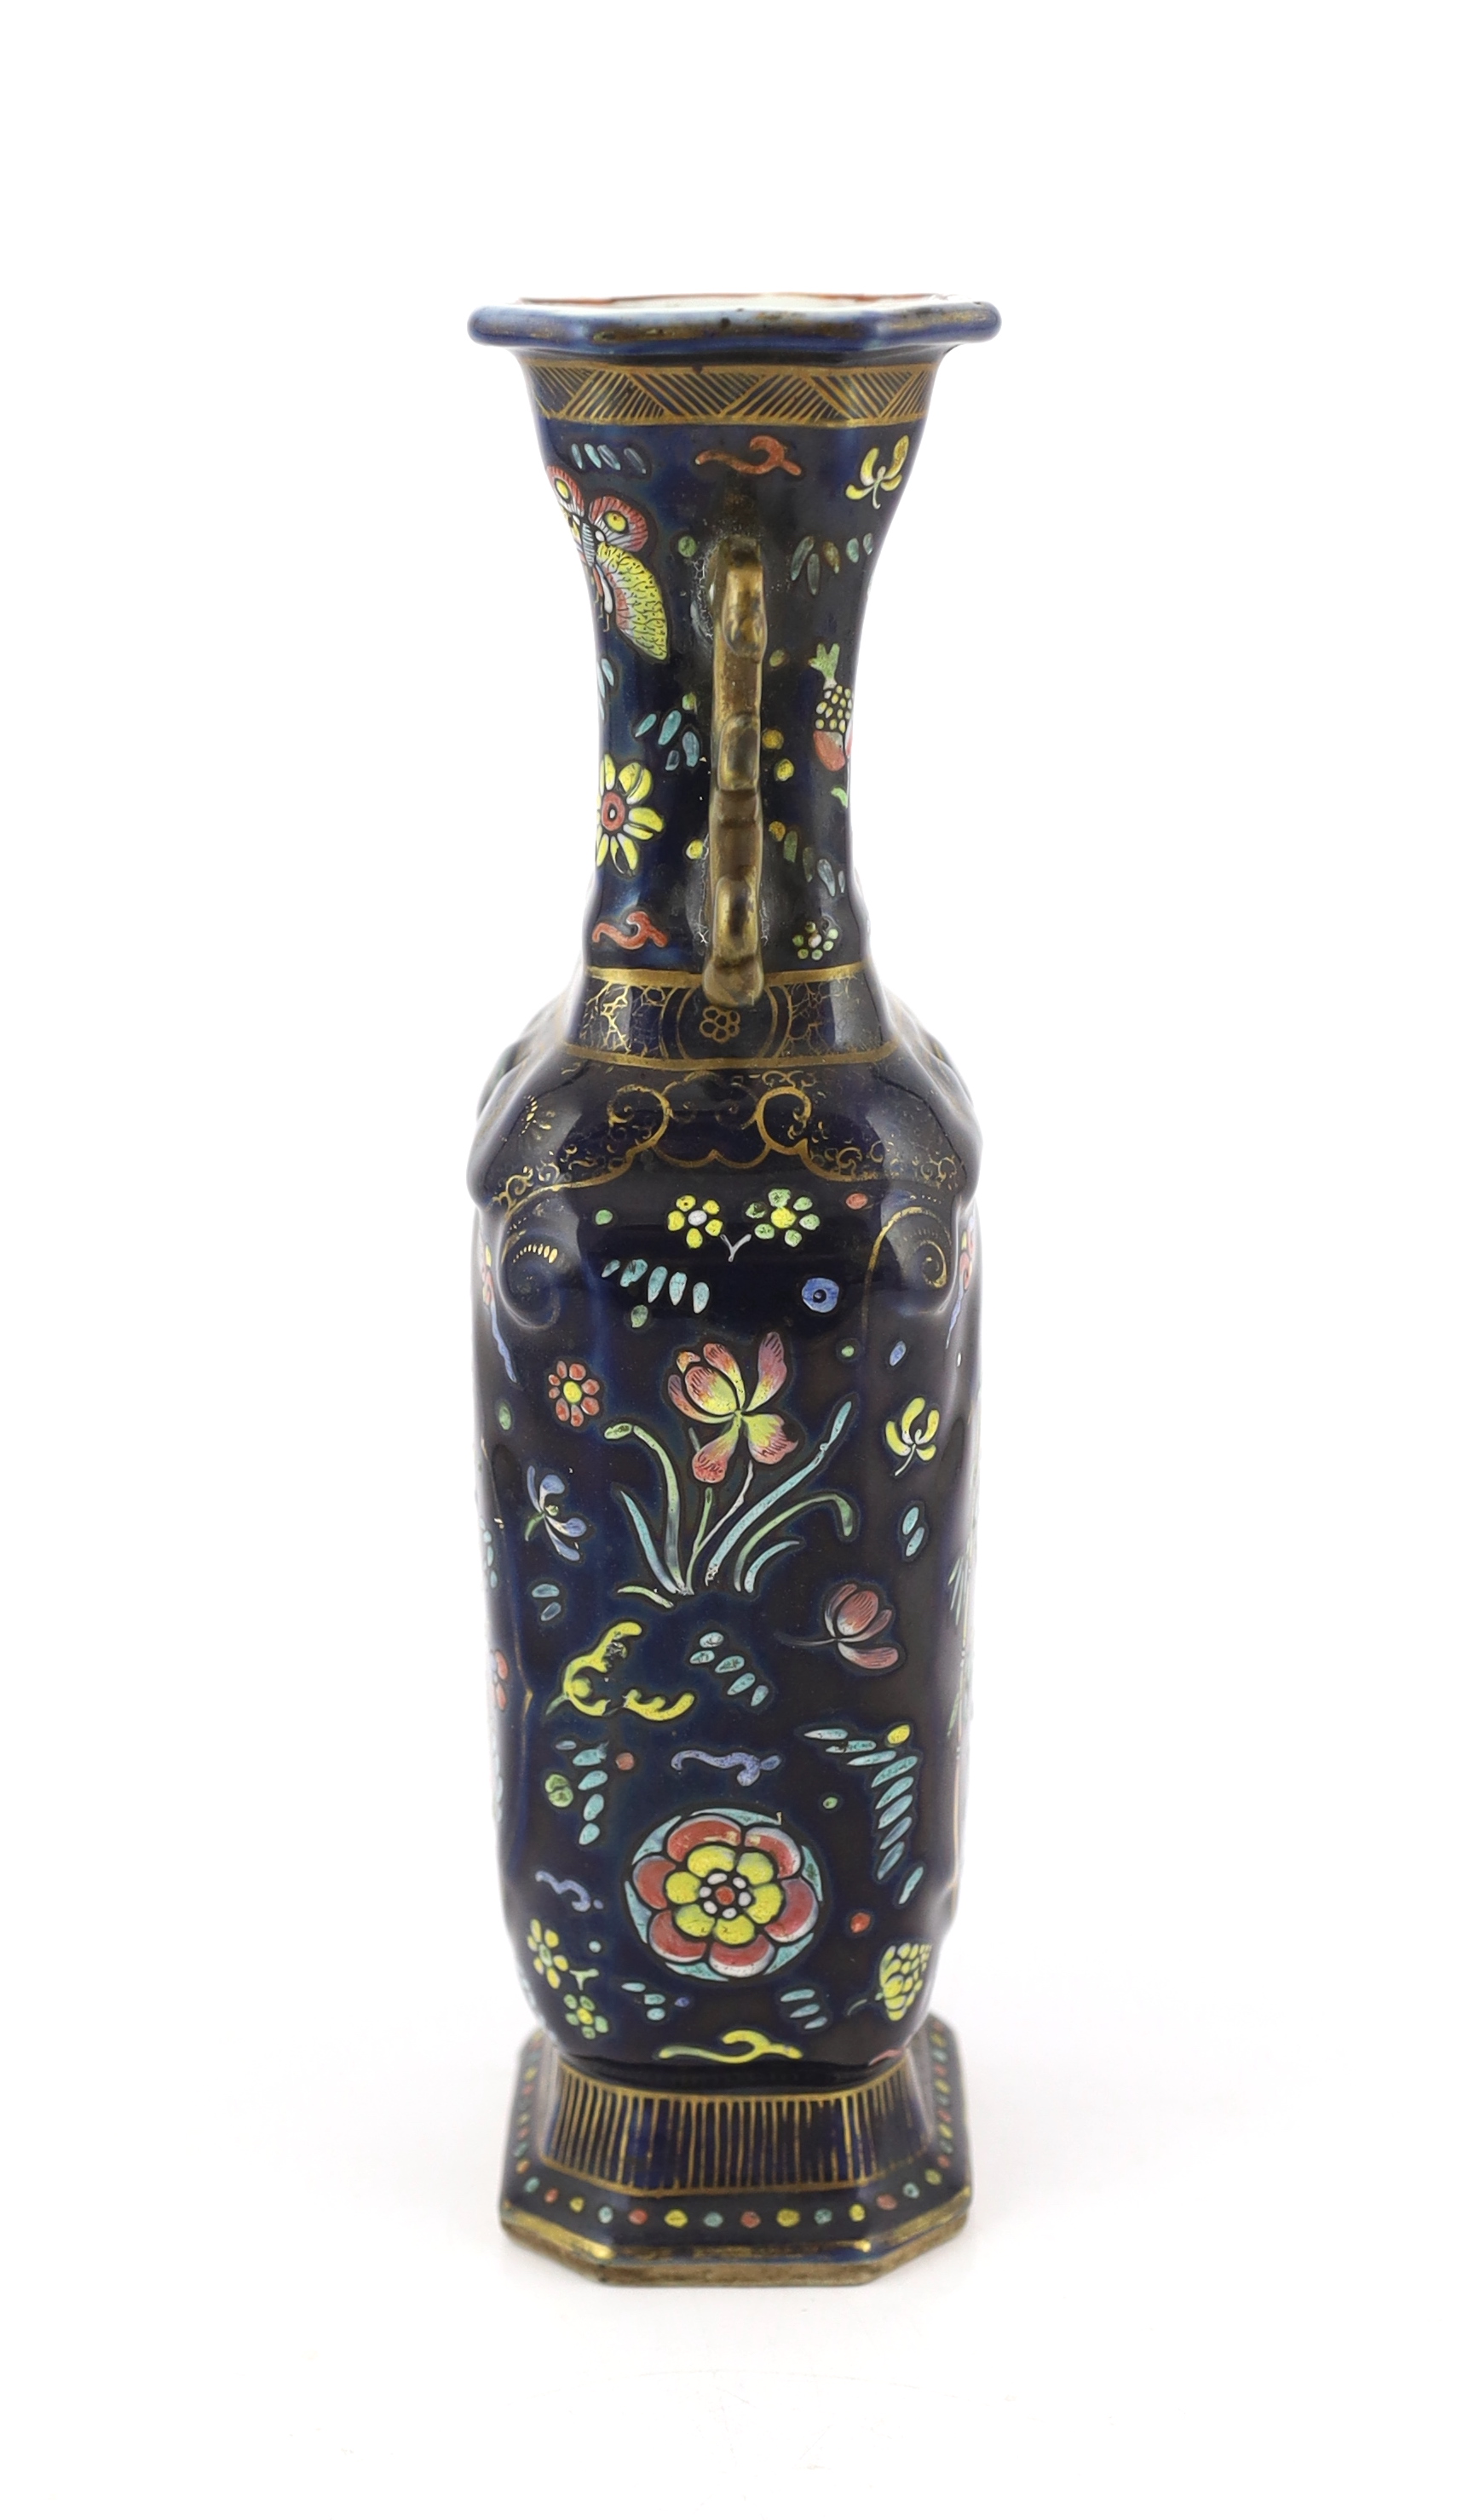 An unusual Chinese blue glazed two handled vase, the porcelain Qianlong period, the enamelled decoration early 19th century English